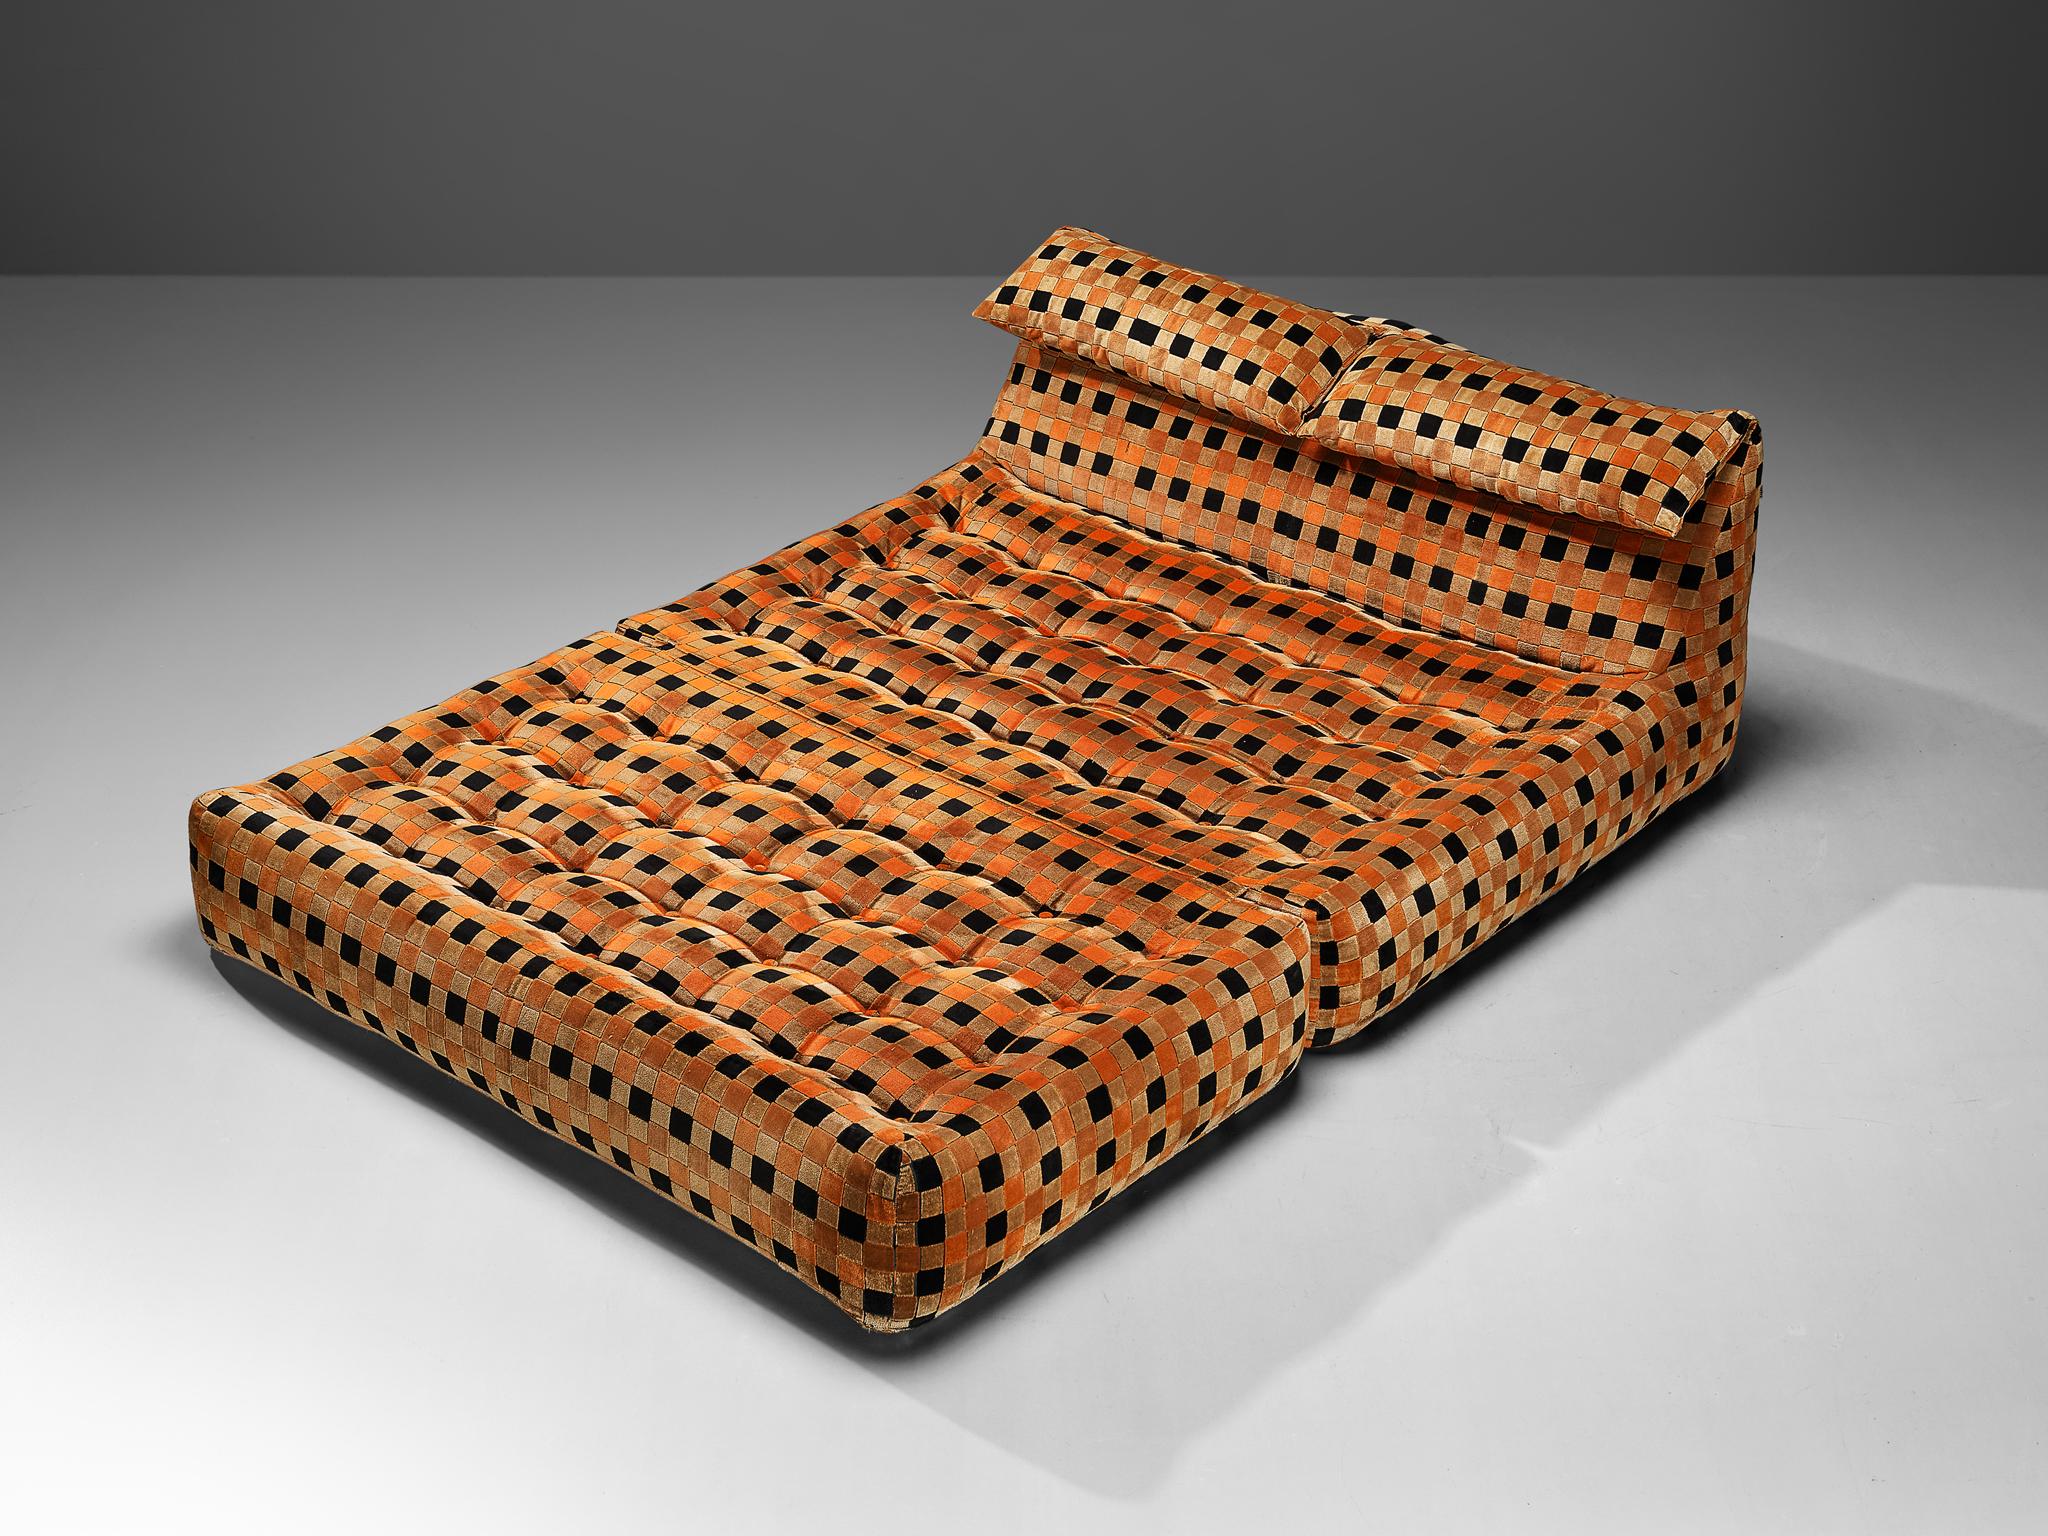 Mario Bellini for B&B Italia, 'Bamboletto' daybed or double bed, fabric, Italy, 1970s

Introducing the exquisite 'Bamboletto' daybed, a testament to the brilliance of design by the renowned Mario Bellini. The 'Bamboletto' bed forms an integral part